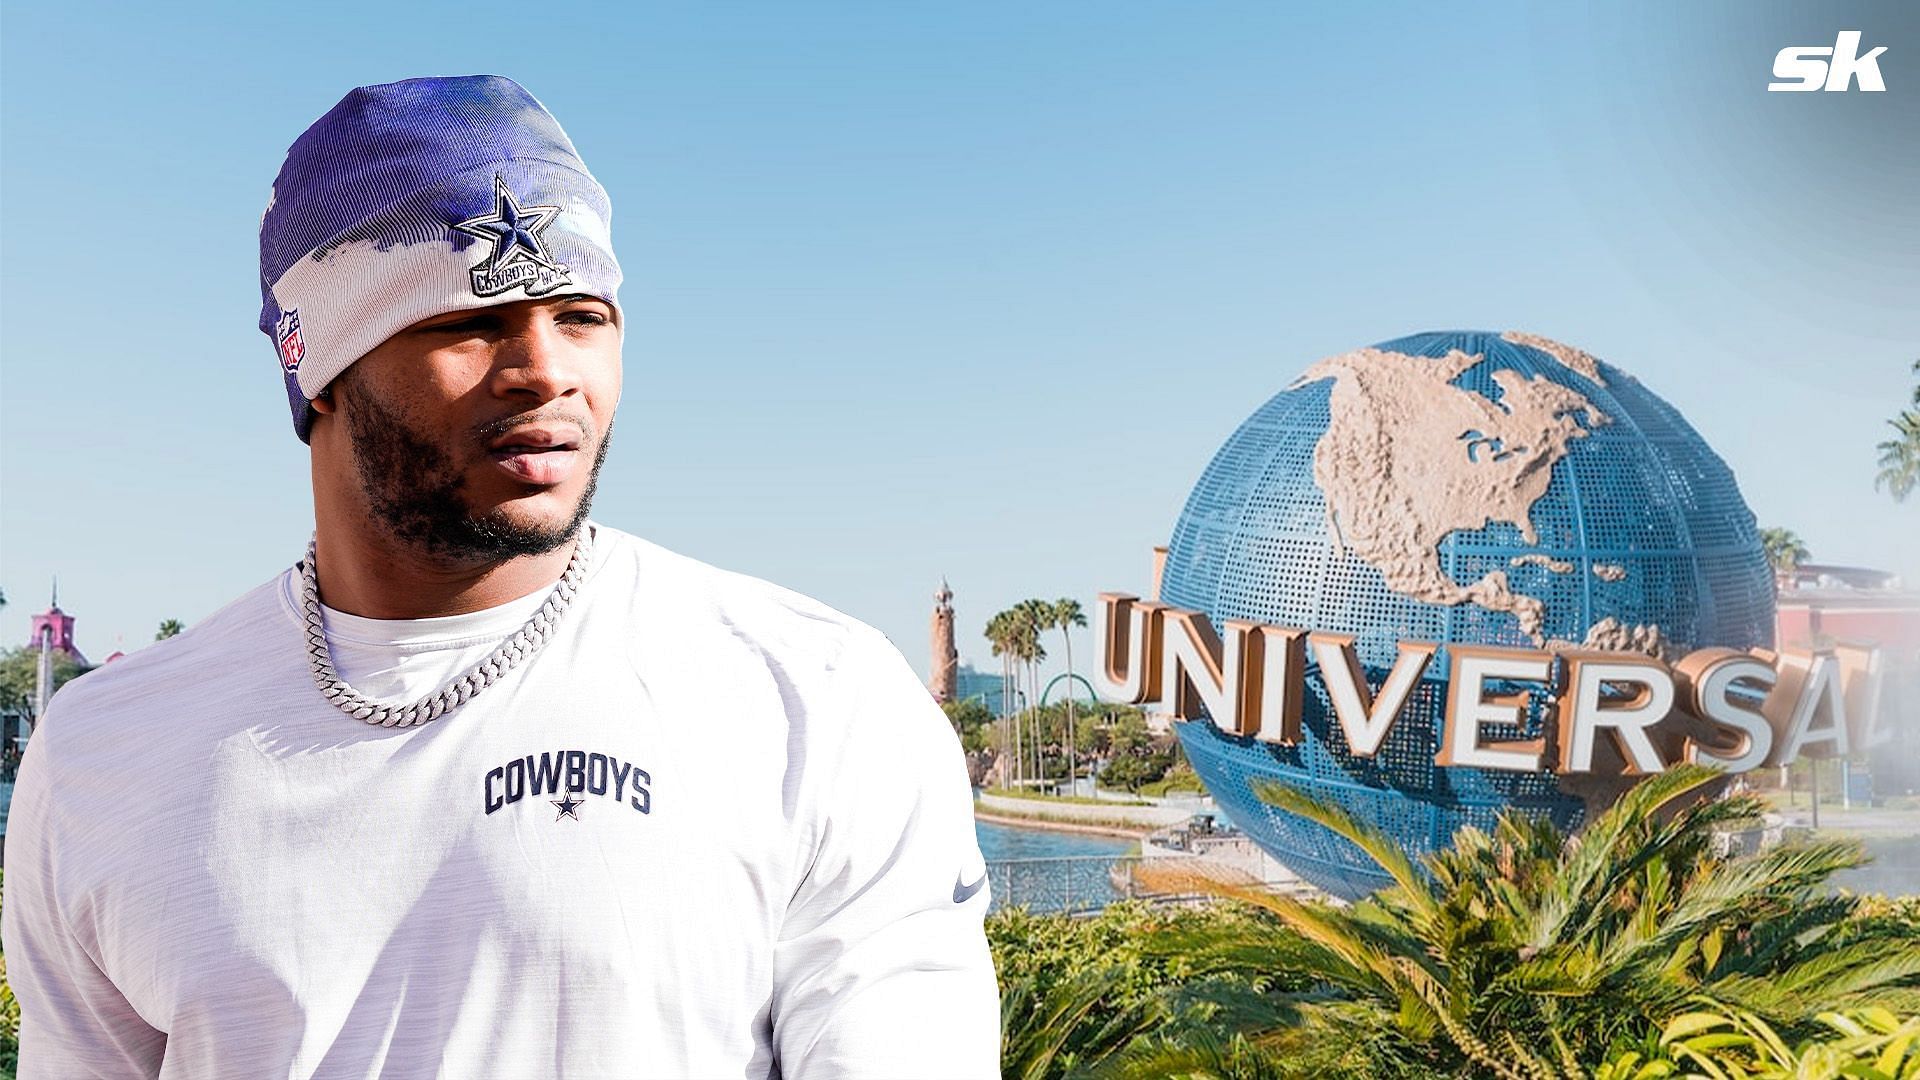 Dallas Cowboys linebacker Micah Parsons has some choice words for Universal Studios.